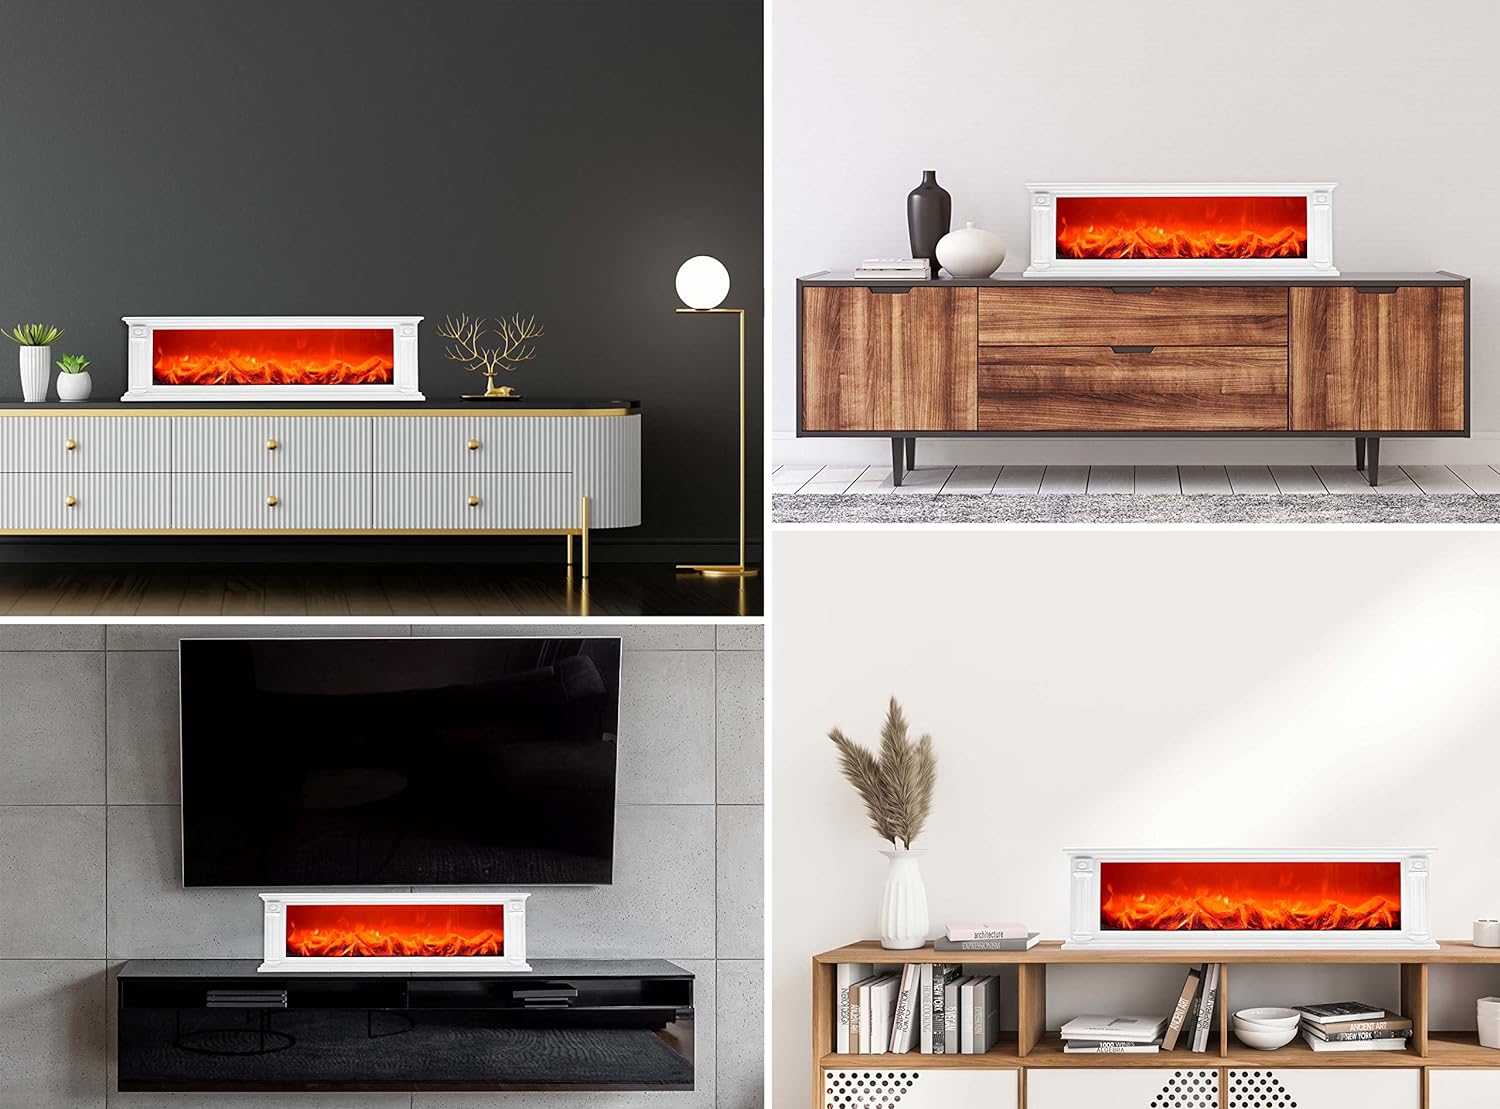 Lighting in the form of a wood-burning fireplace